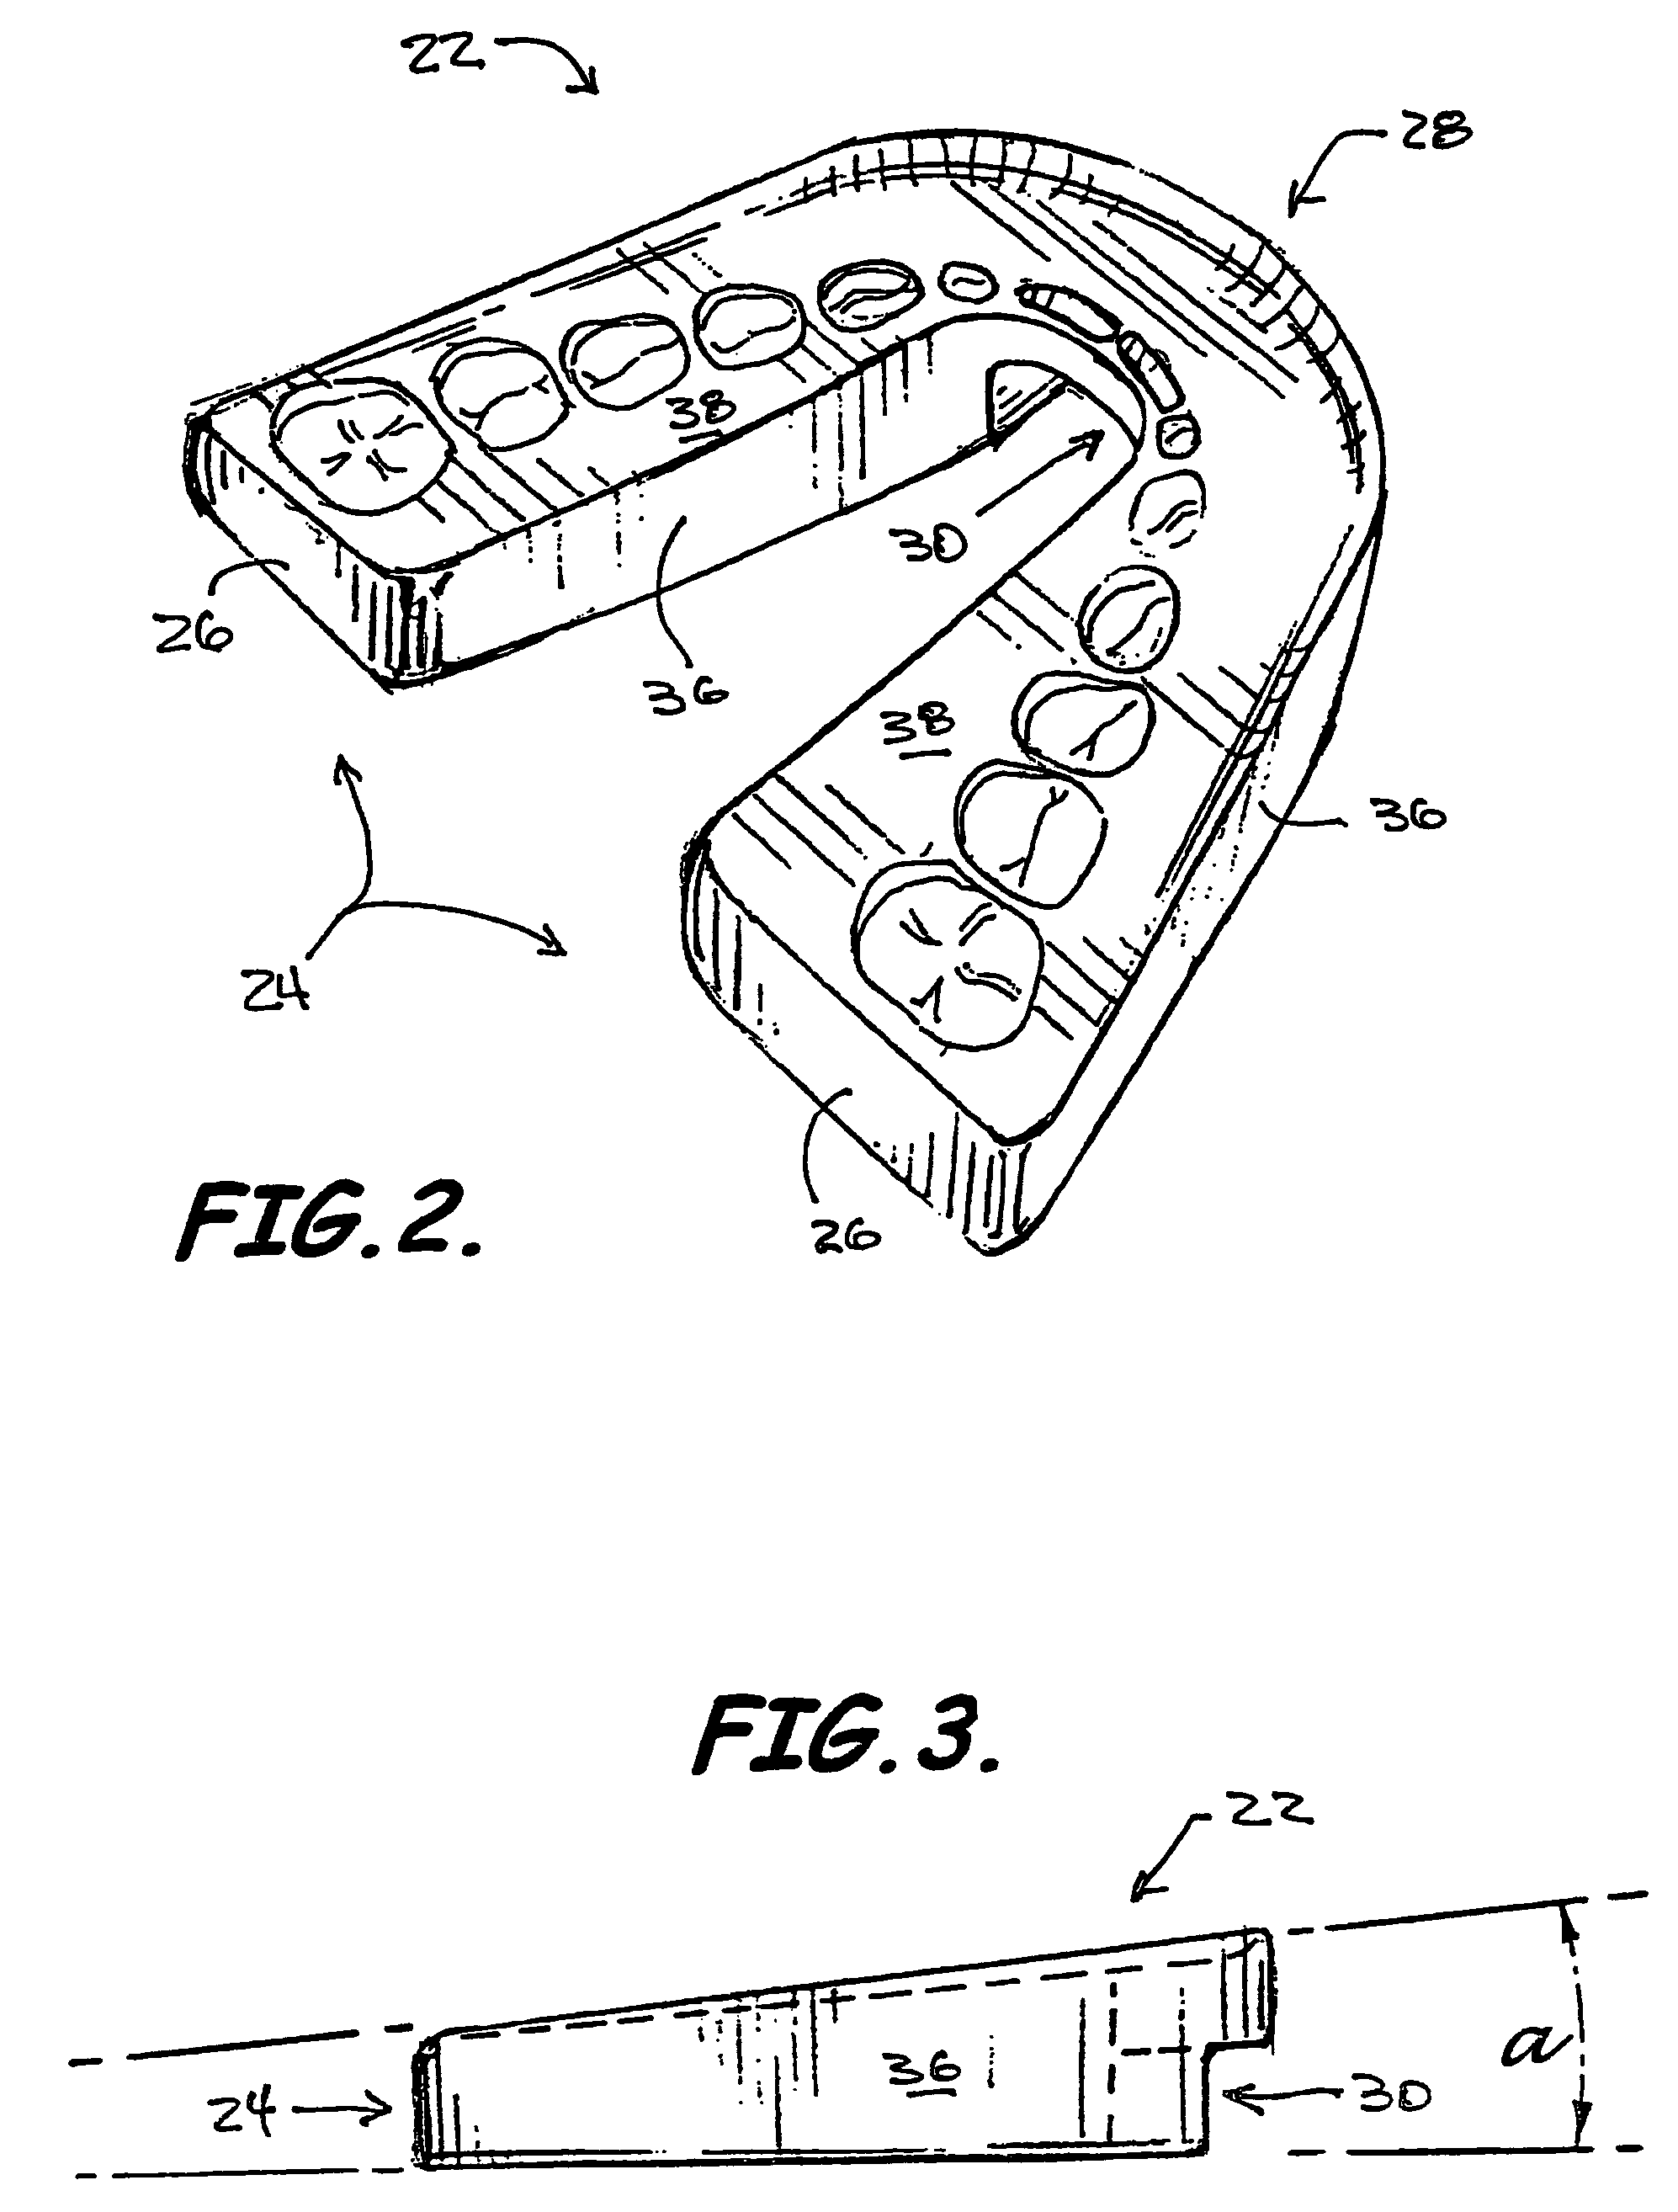 Mouthpiece for reducing snoring